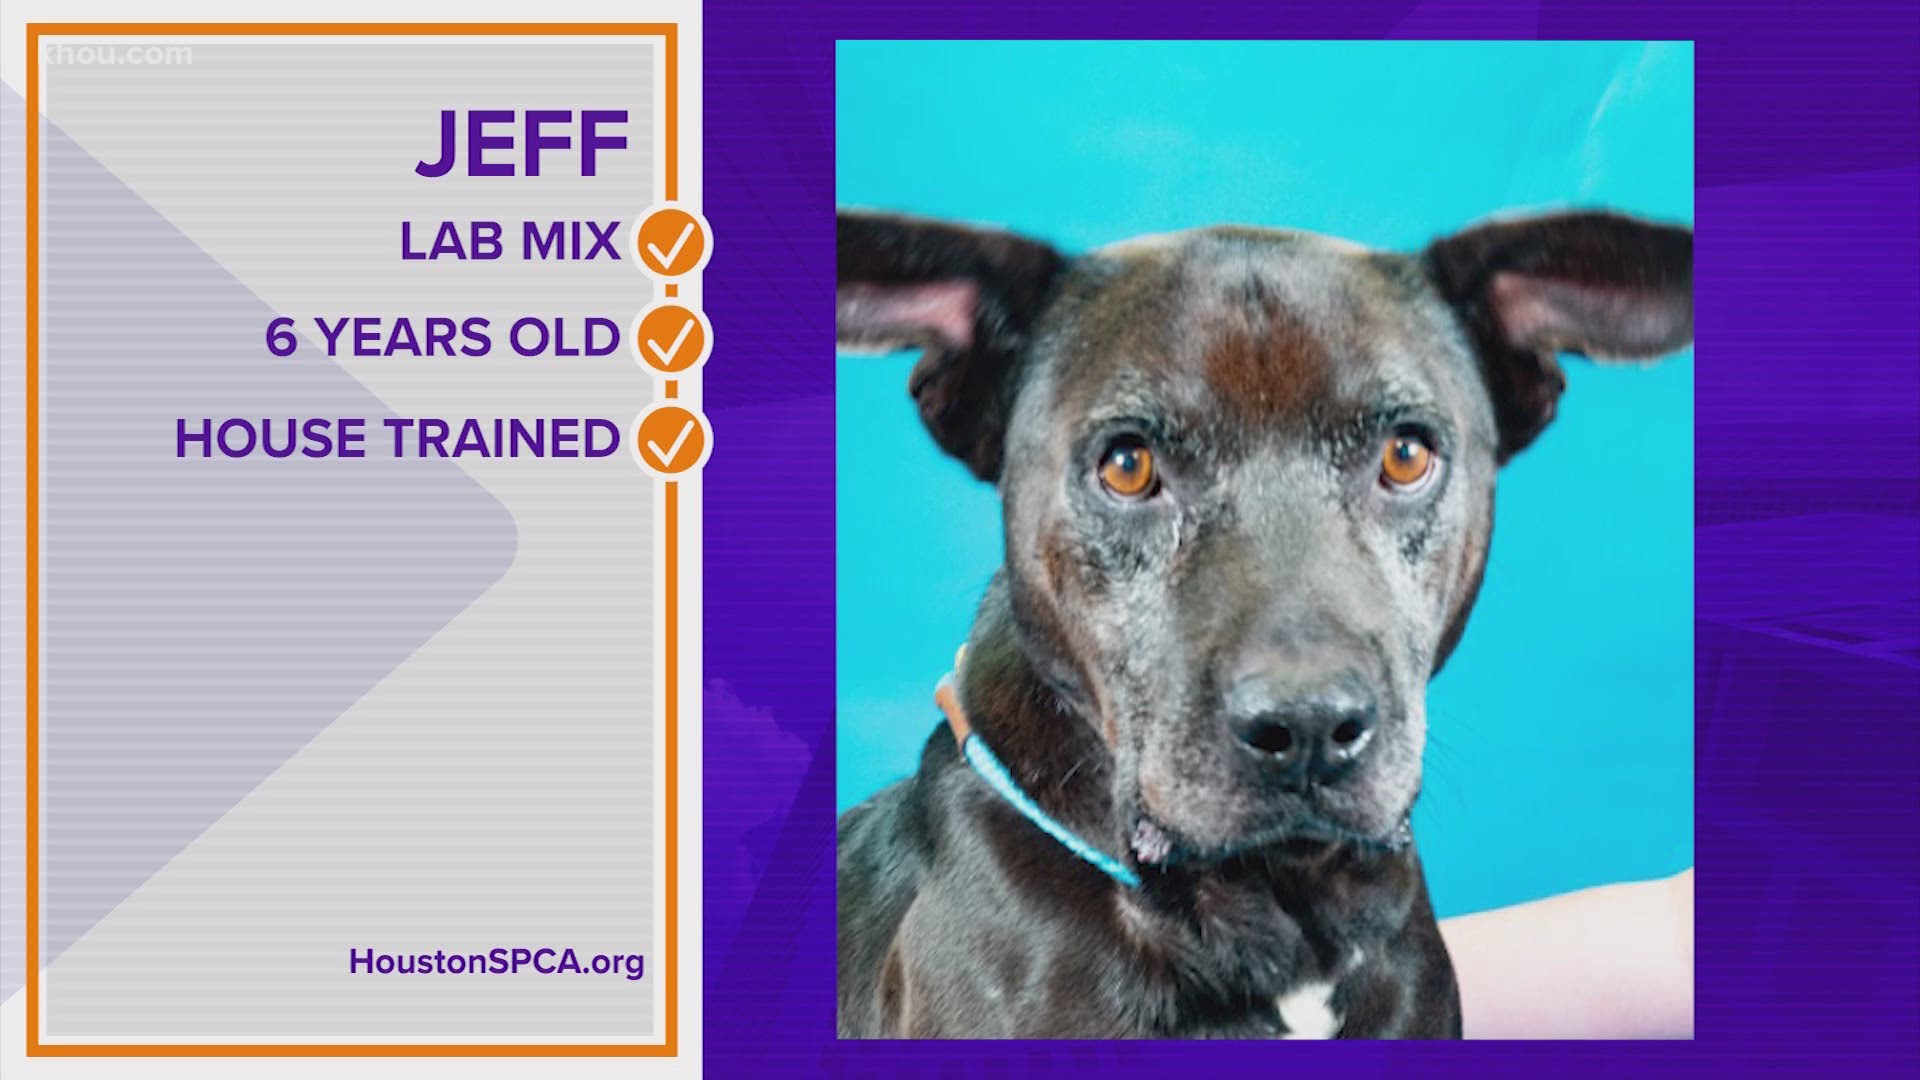 For more on Jeff and other homeless animals go to houstonspca.org.